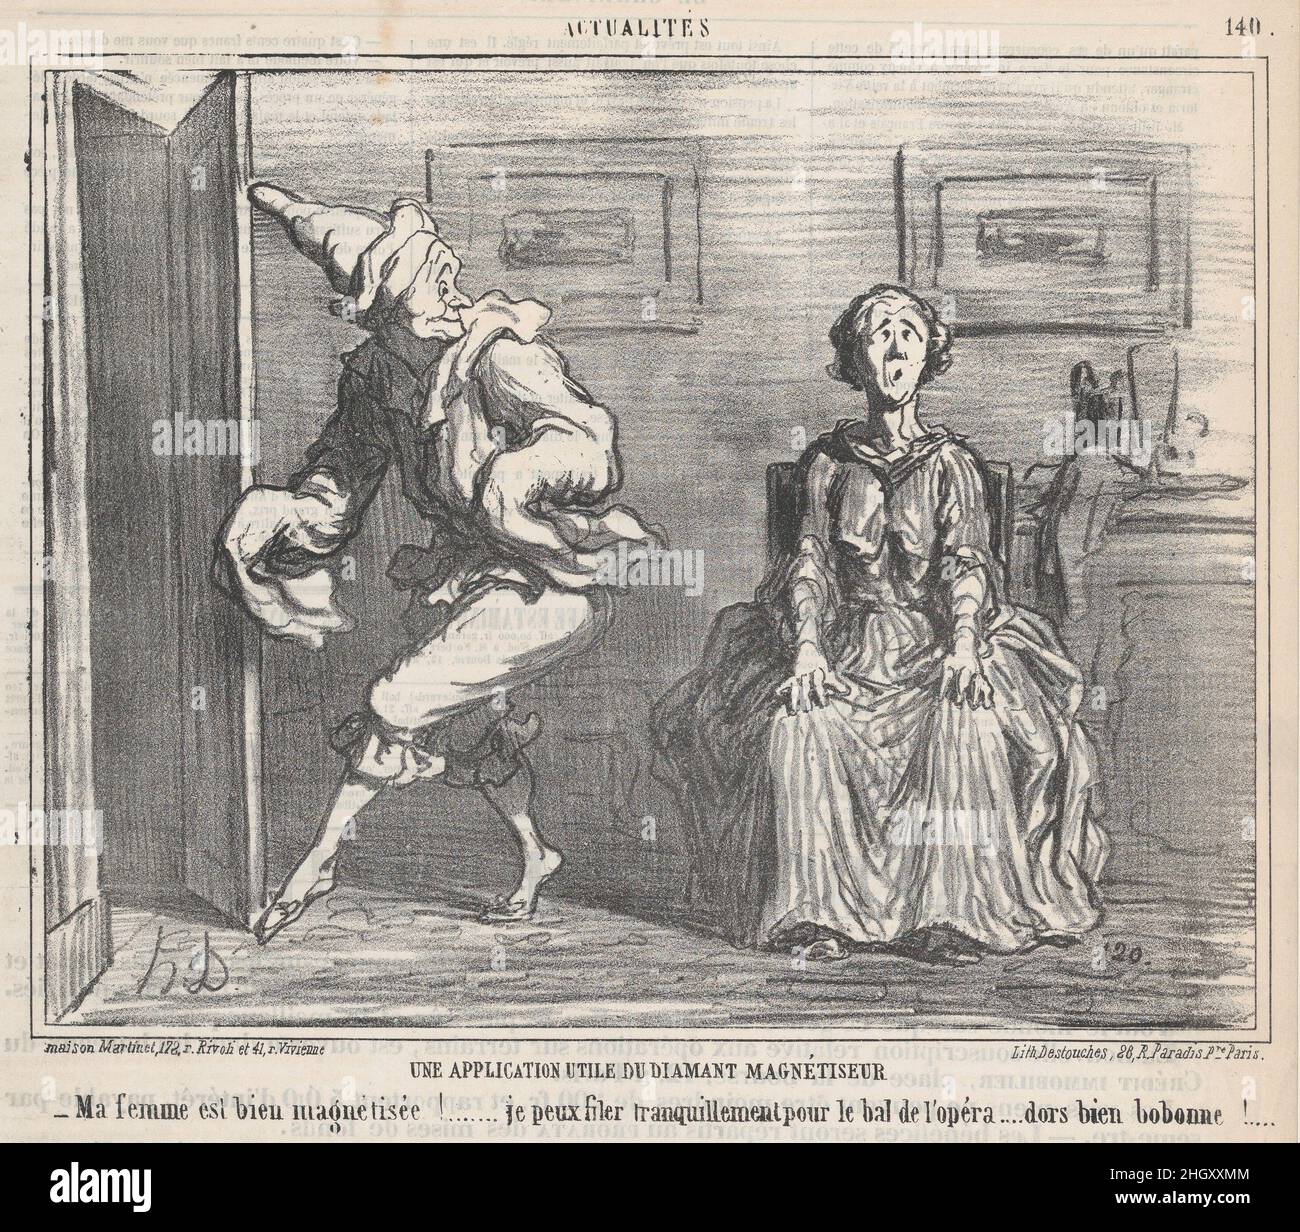 Practical application for a diamond hypnotist, from 'News of the Day,' published in Le Charivari, January 24, 1860 January 24, 1860 Honoré Daumier My wife is hypnotized... now I can quietly leave for the opera ball.... sleep well, my dear!. Practical application for a diamond hypnotist, from 'News of the Day,' published in Le Charivari, January 24, 1860. 'News of the Day' (Actualités). Honoré Daumier (French, Marseilles 1808–1879 Valmondois). January 24, 1860. Lithograph on newsprint; second state of three (Delteil). Aaron Martinet (French, 1762–1841). Prints Stock Photo